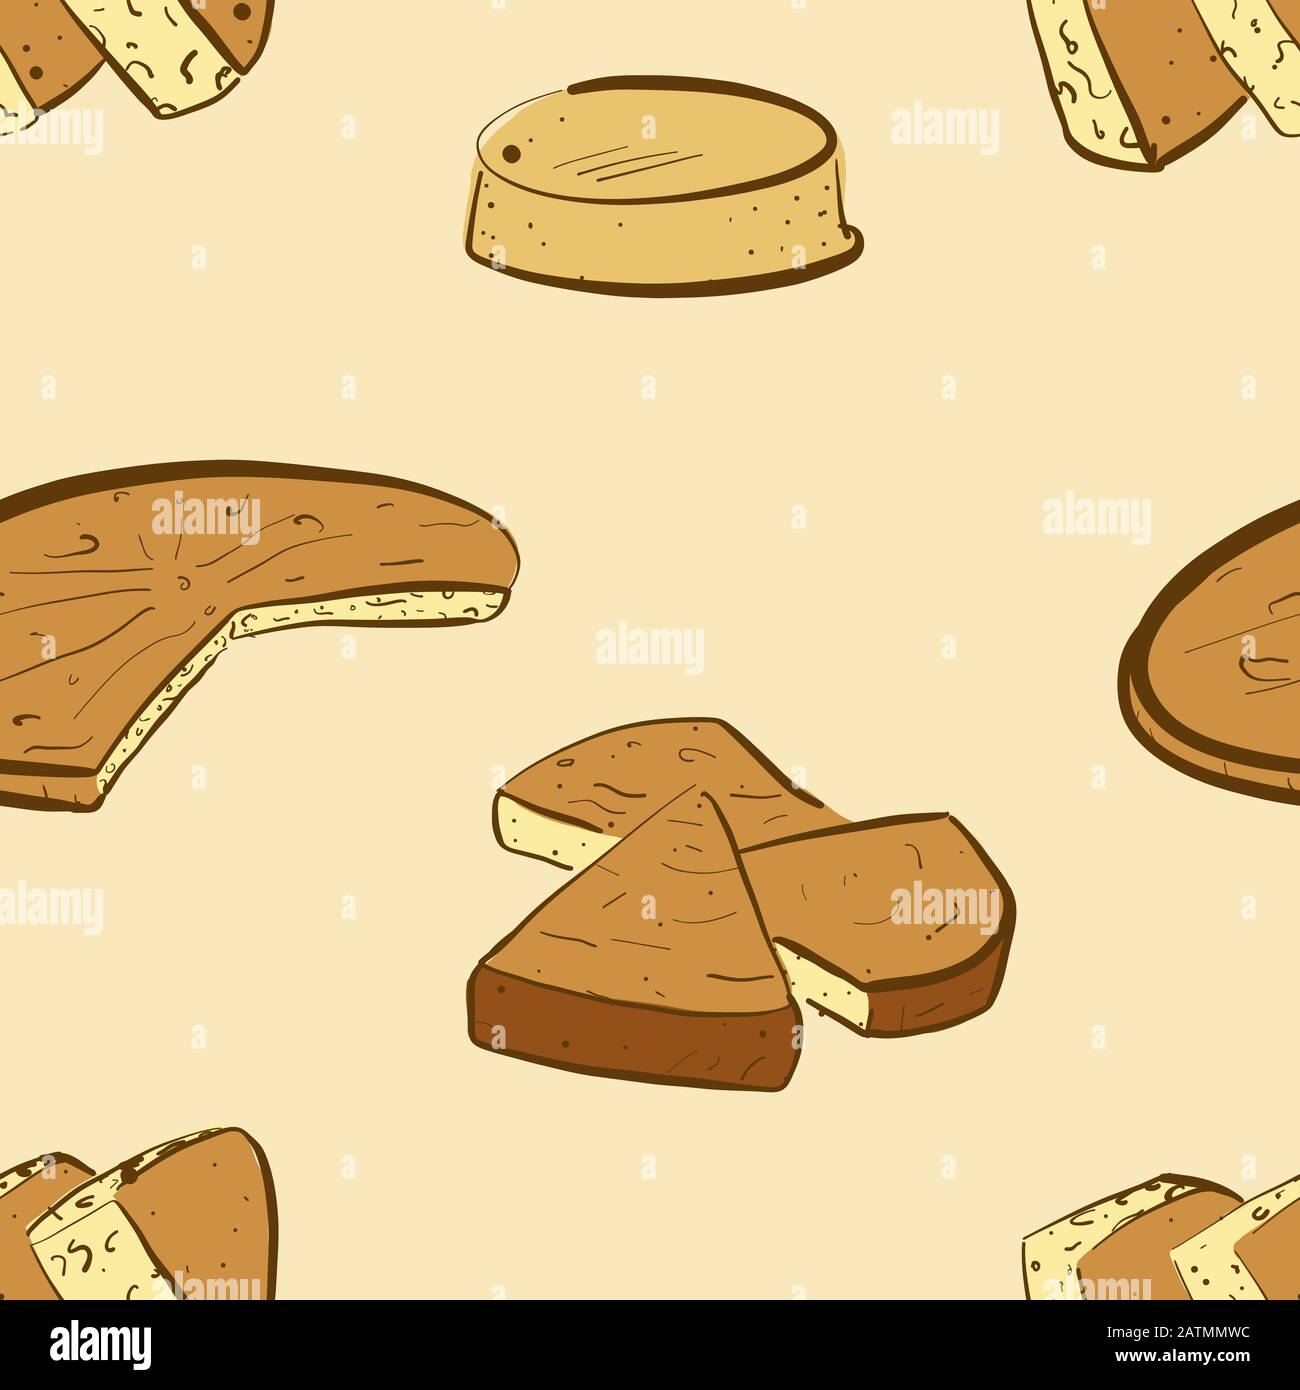 Seamless pattern of sketched Bammy bread. Useable for wallpaper or any sized decoration. Handdrawn Vector Illustration Stock Vector